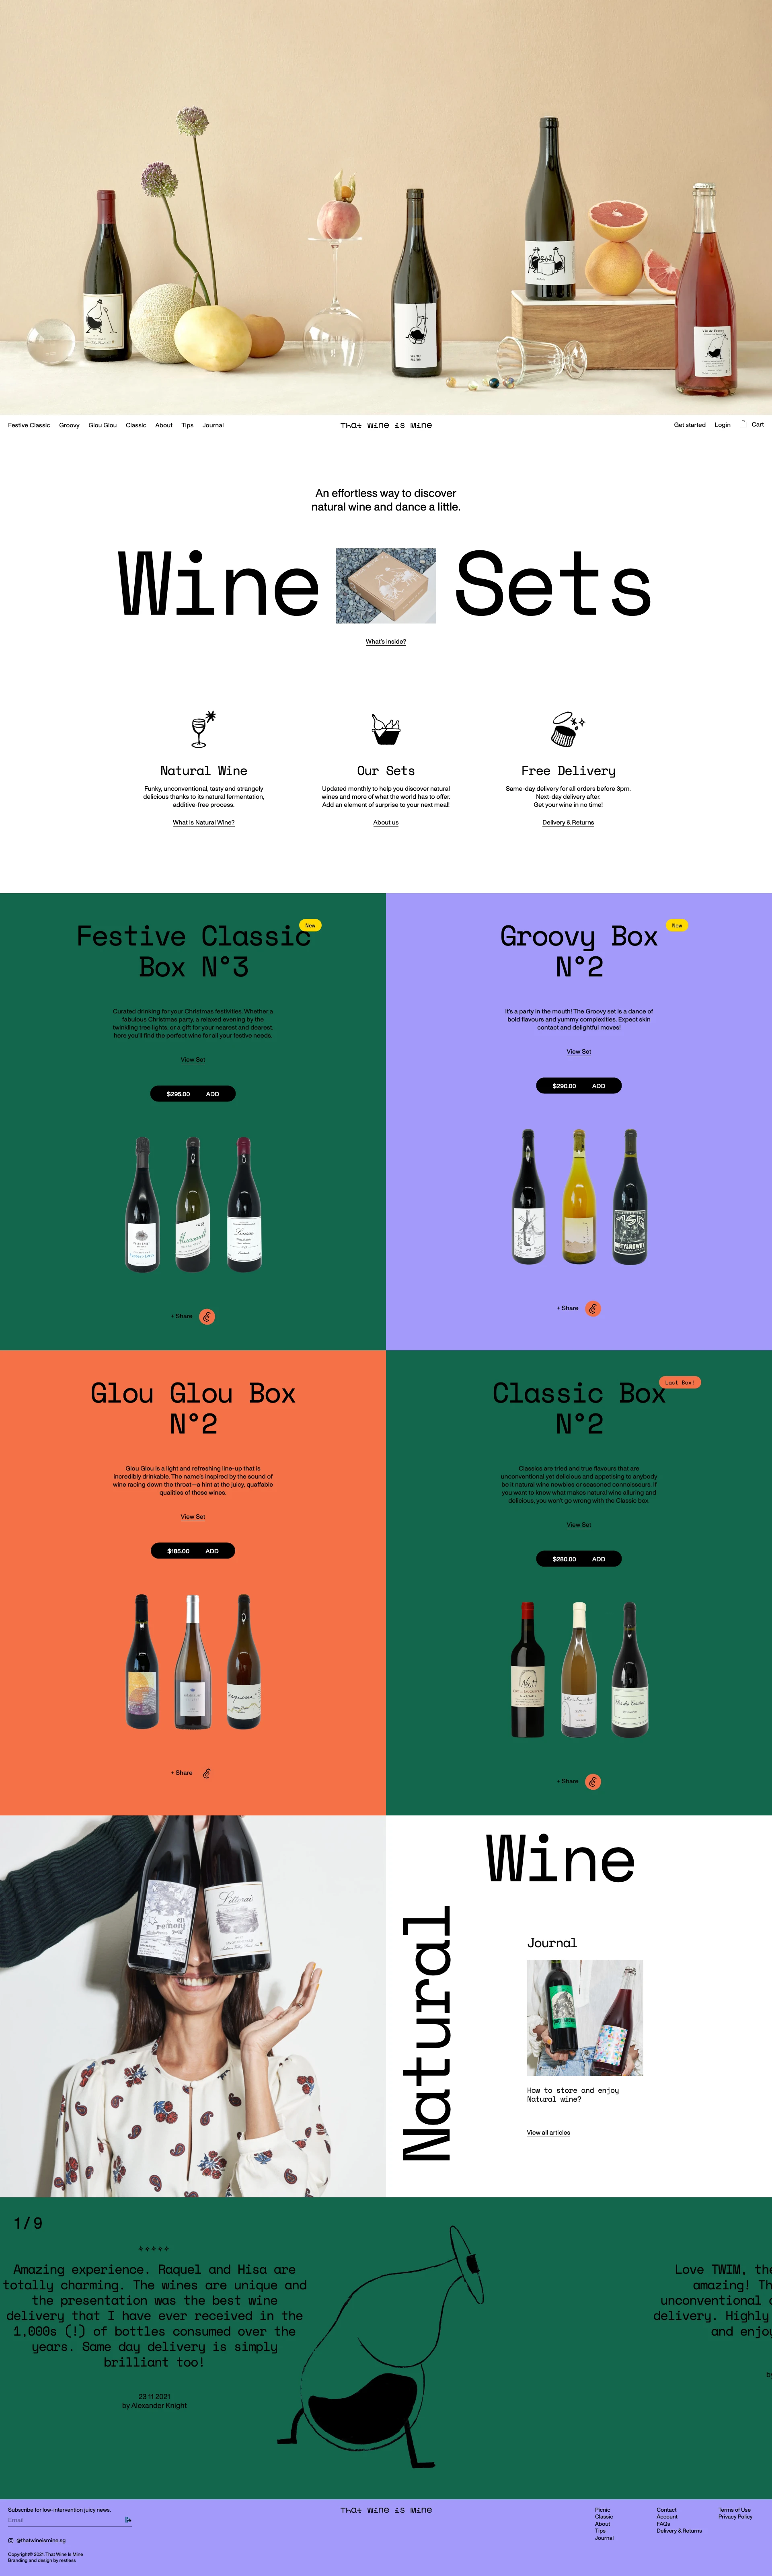 That Wine Is Mine Landing Page Example: Natural wine shop in Singapore - Buy natural, organic, biodynamic wine sets.